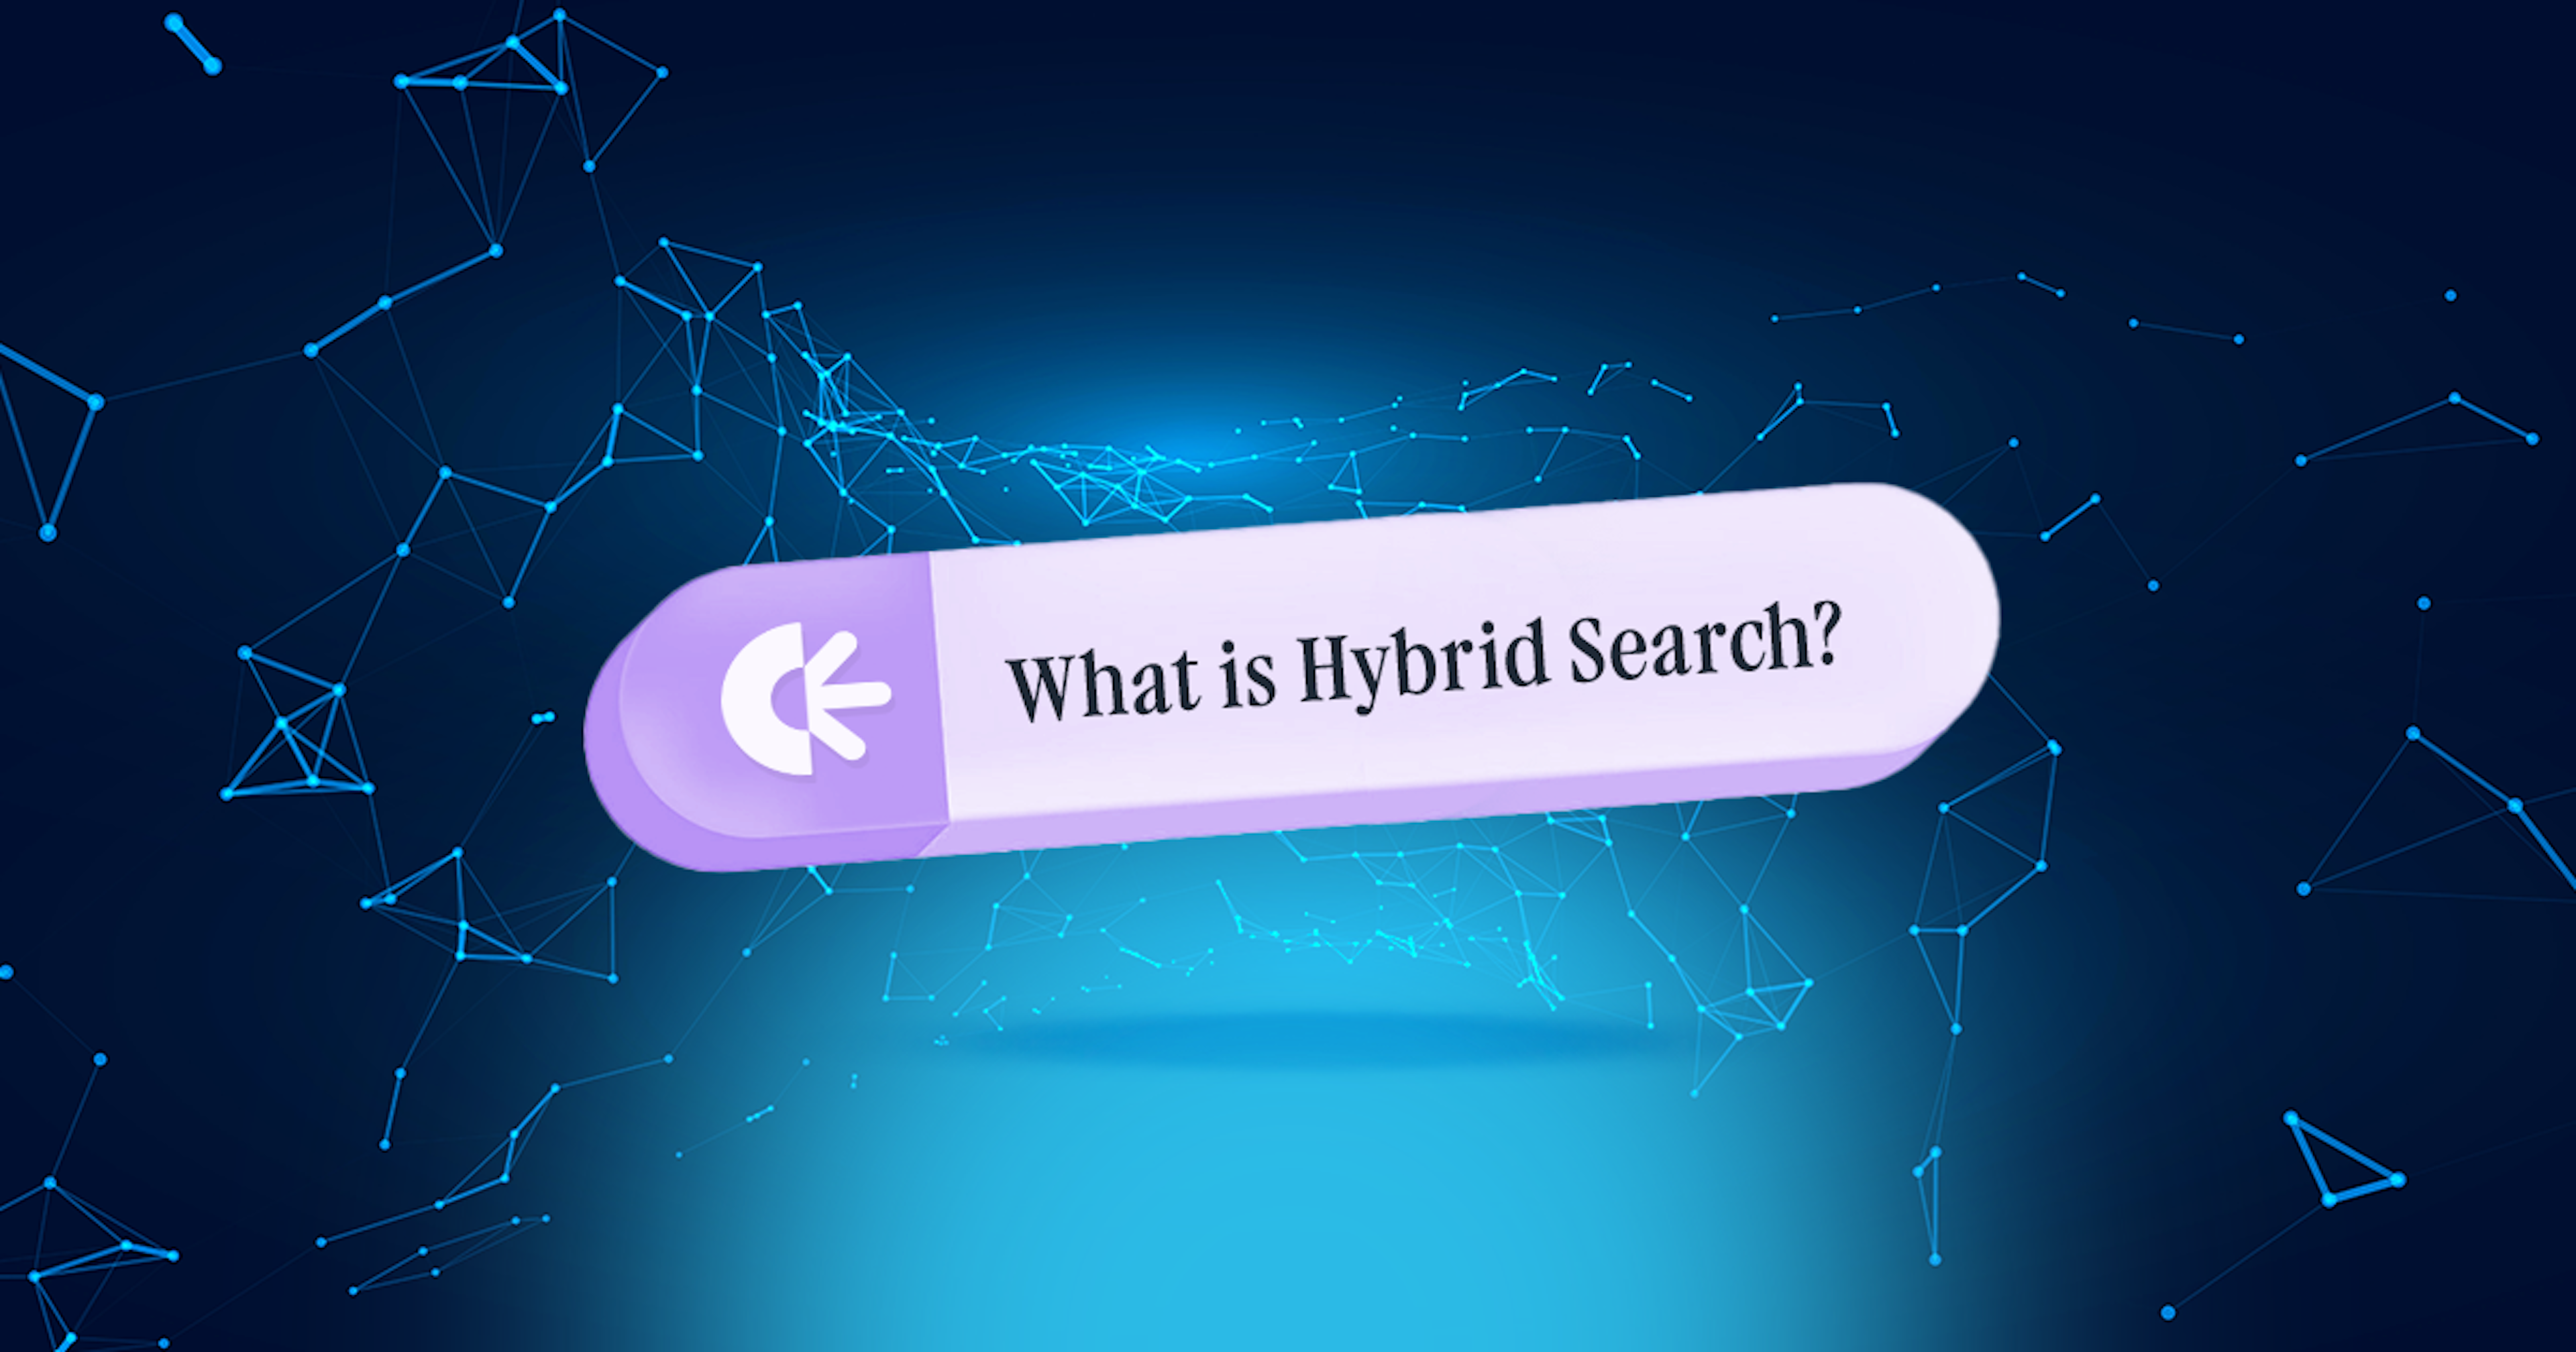 What is Hybrid Search?